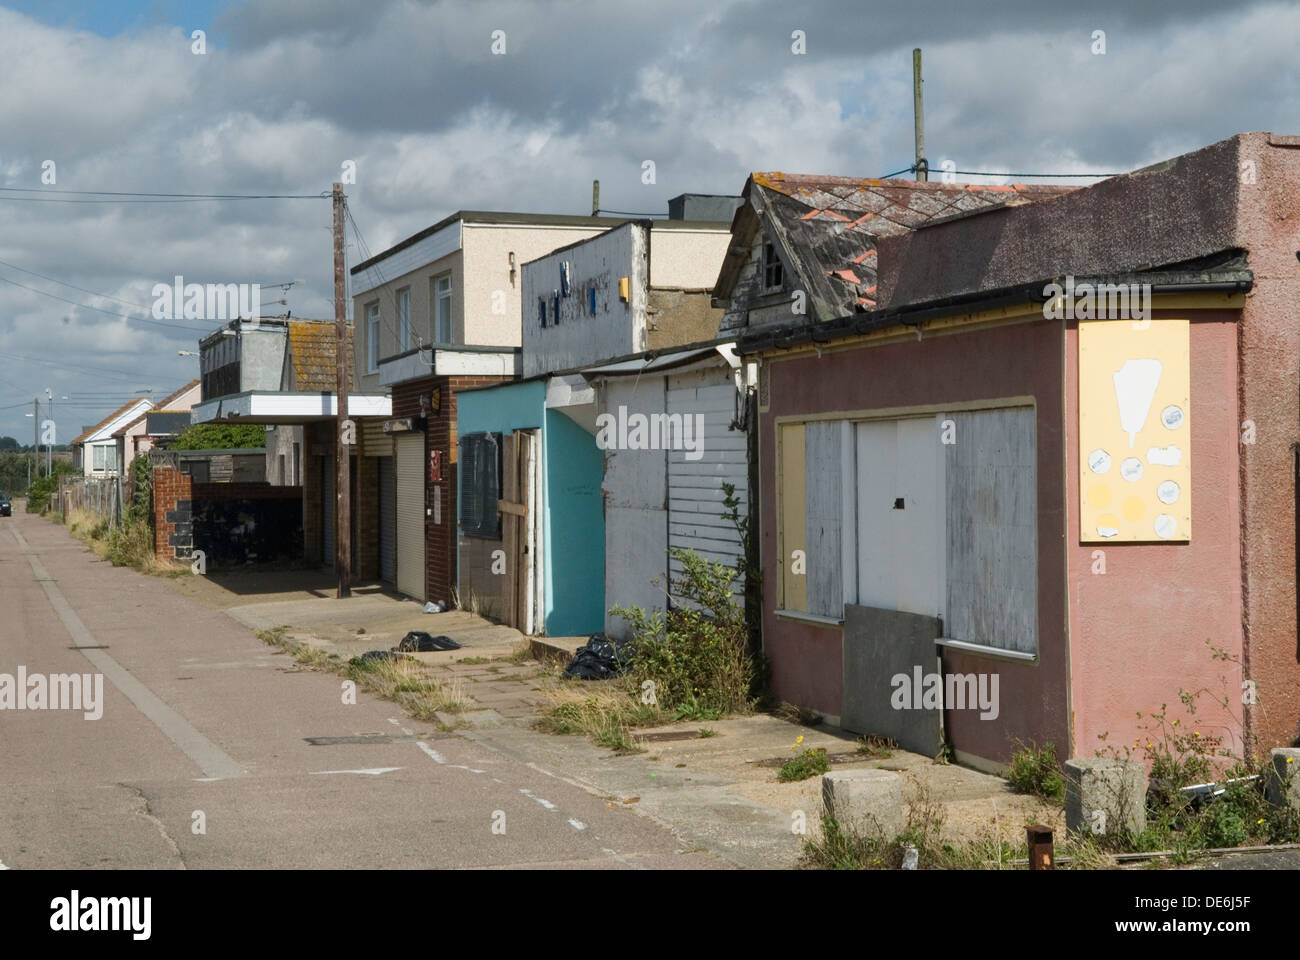 Poverty boarded up buildings  Jaywick Essex Uk Brooklands Estate   England  2010s 2013 UK HOMER SYKES Stock Photo